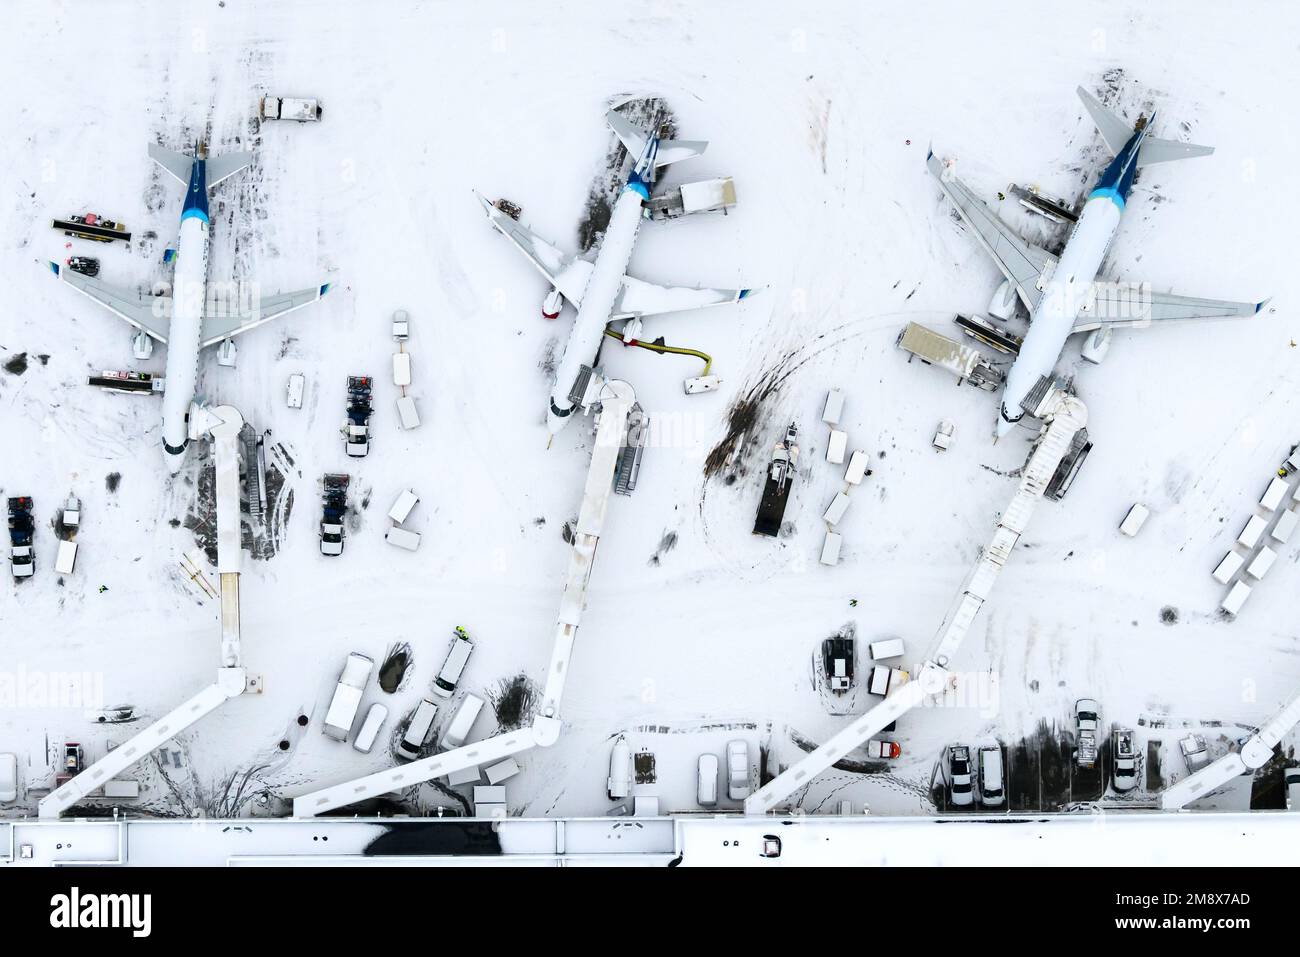 Alaska Airlines operations at Anchorage Airport after a heavy snow fall. Aviation in winter with snow. Aircraft Boeing 737 and Embraer of Alaska. Stock Photo